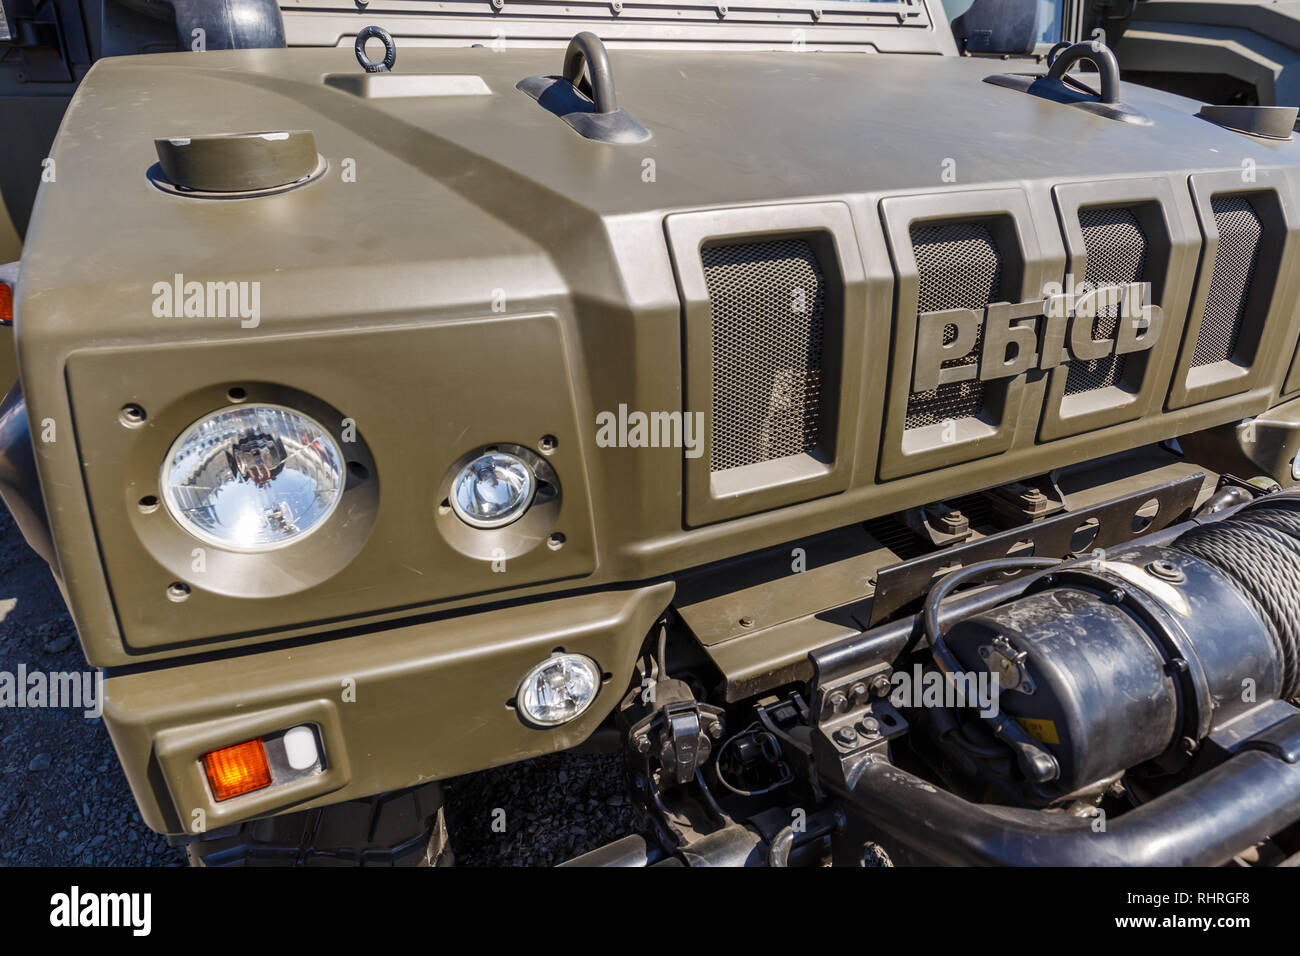 International military technical forum ARMY-2018. Special multi-purposes armored vehicle Rys, Iveco LMV. Close-up view of the headlight, grille and wi Stock Photo